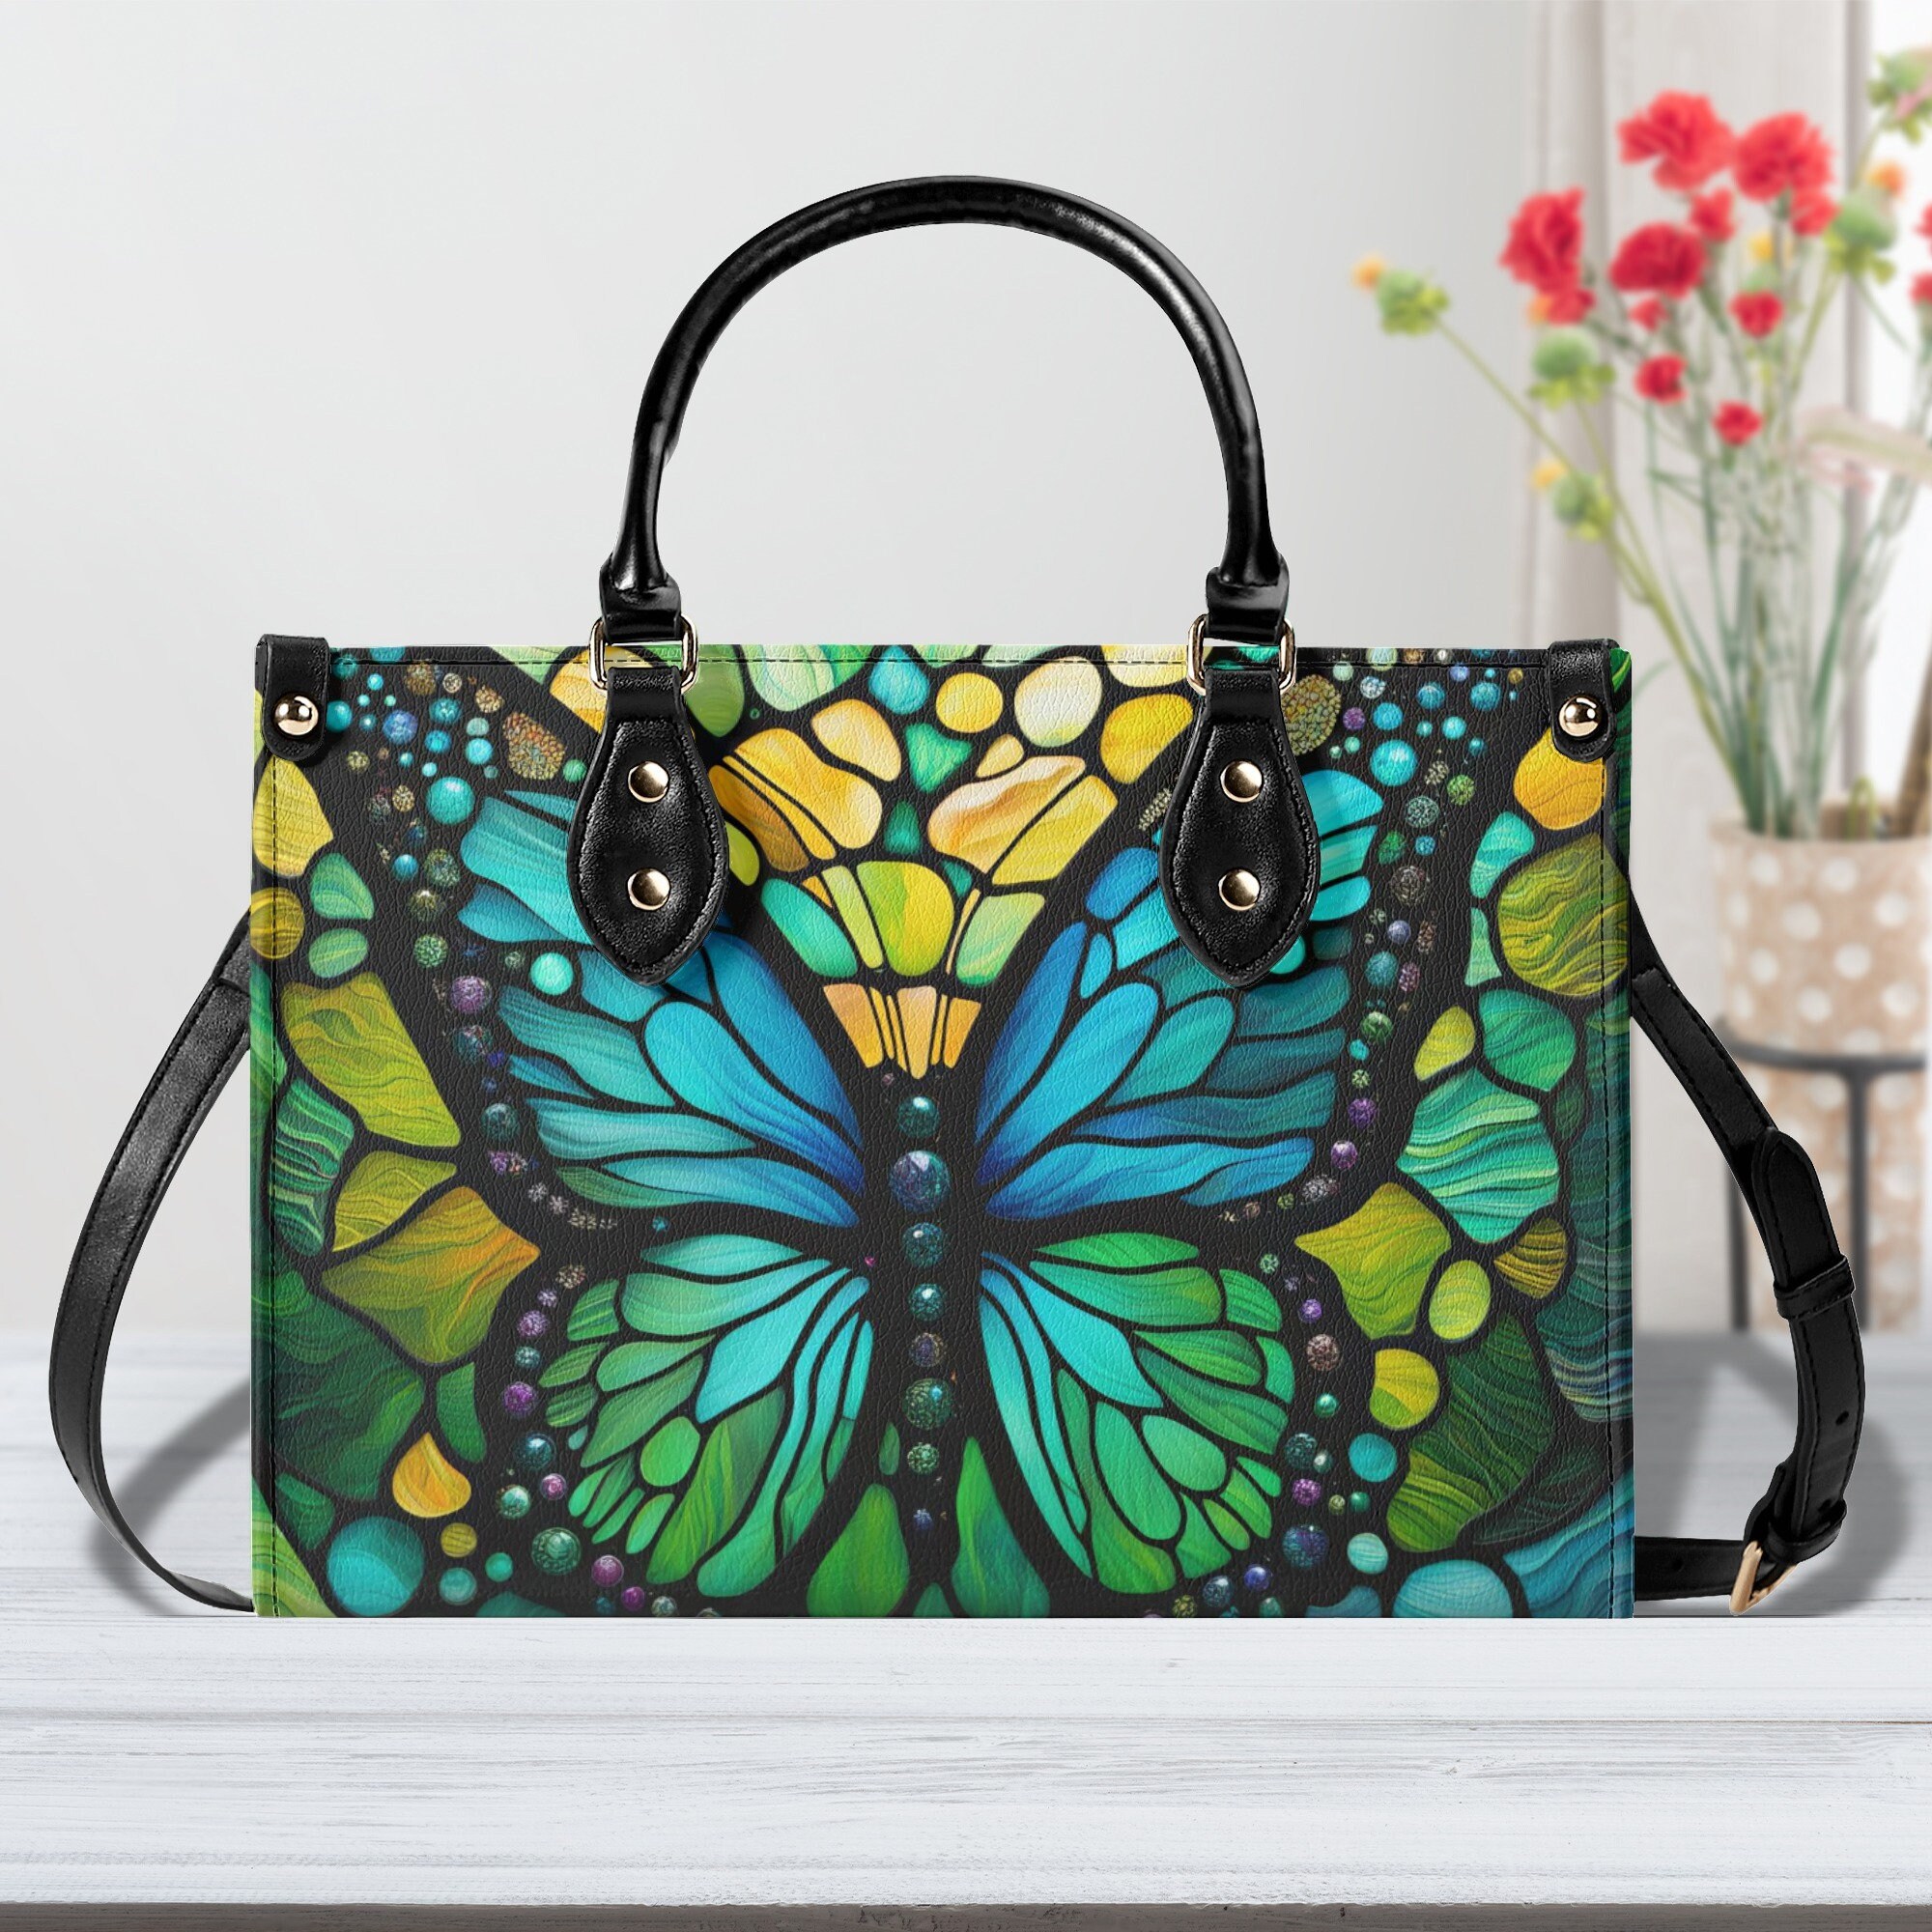 Elegant Turquoise Butterfly Tote Purse, Blue Green Stained Glass Handbag Vegan Leather Bag